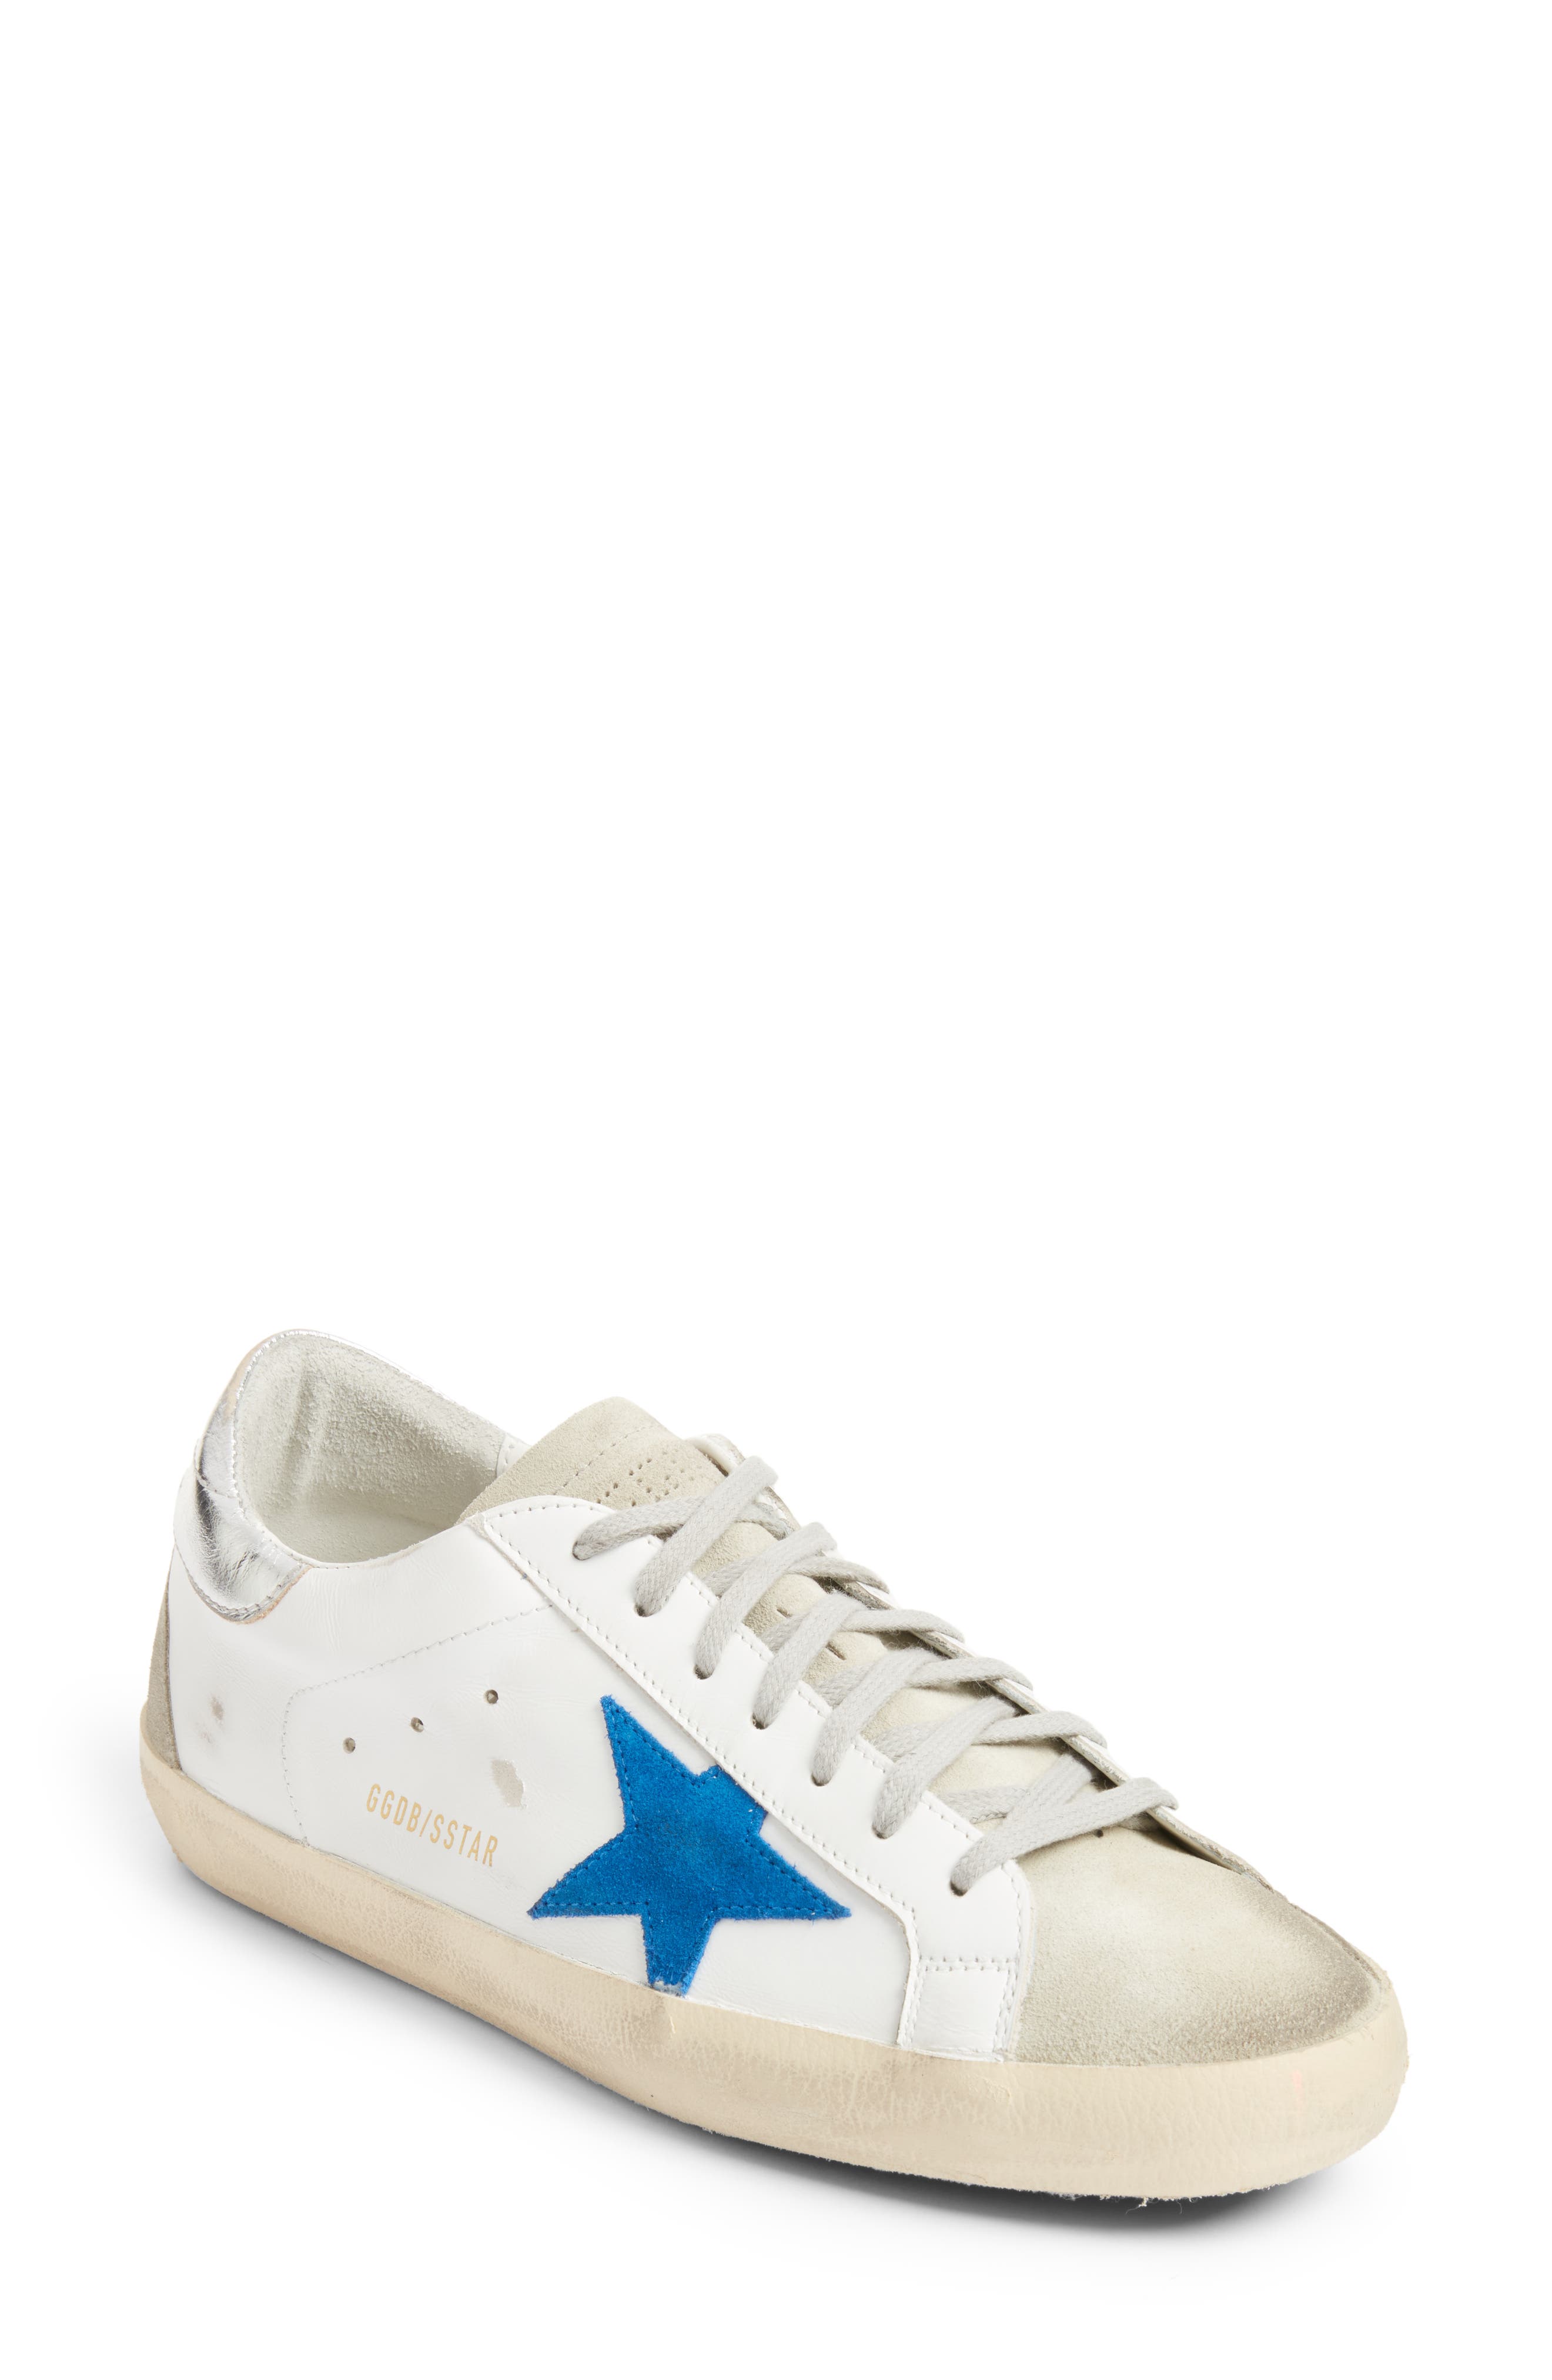 Golden Goose Superstar Low Top Sneaker in White/Electric Blue/Silver at Nordstrom, Size 6Us